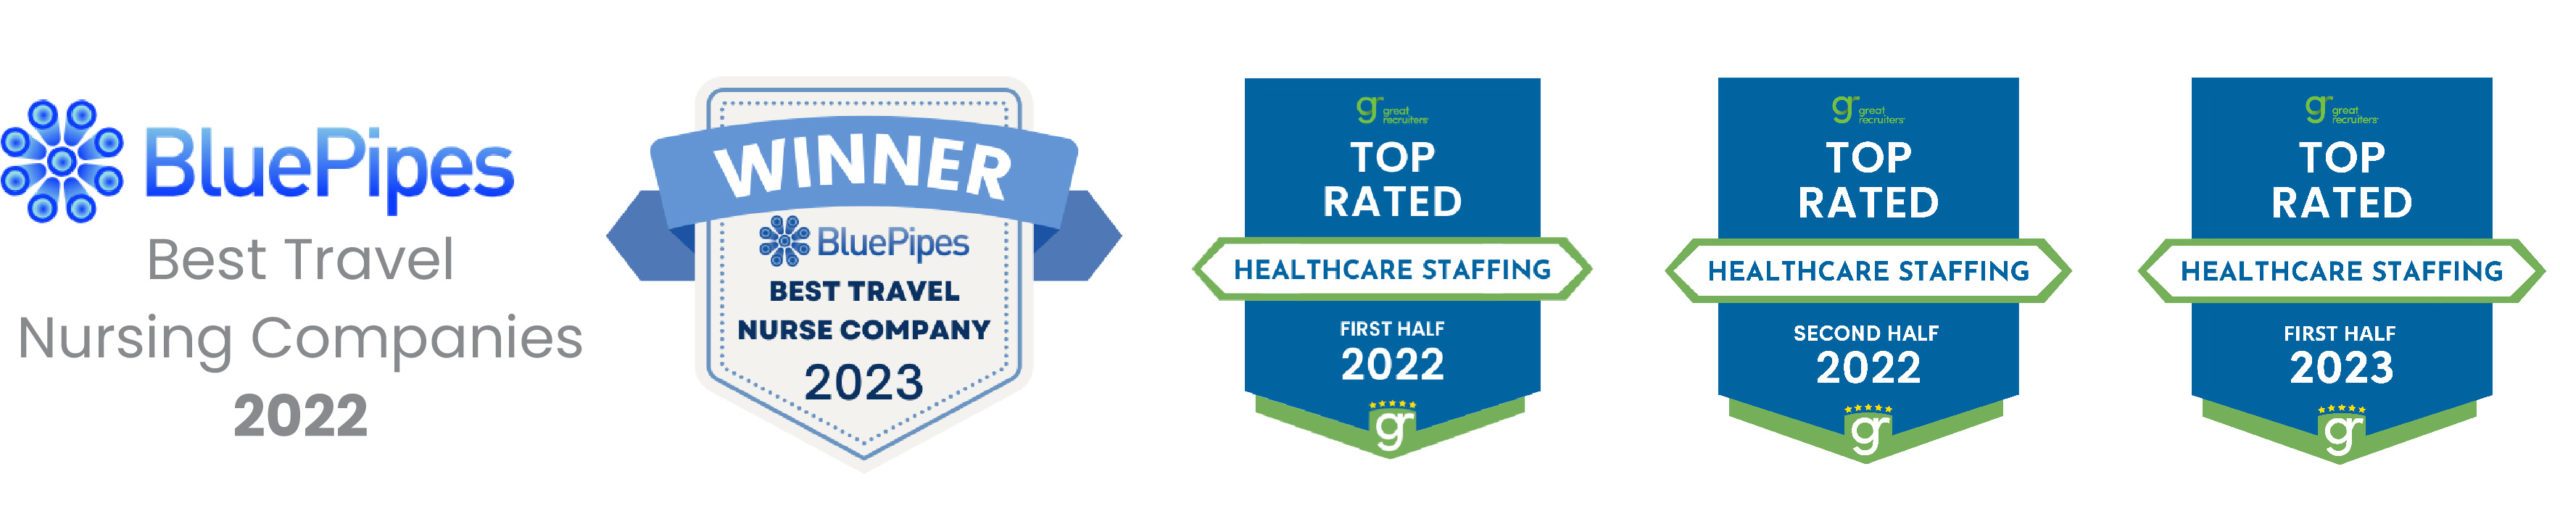 Blue Pipes Best Travel Nursing Companies 2023 award image and Great Recruiters top rated Healthcare Staffing Company award first half 2022 award image